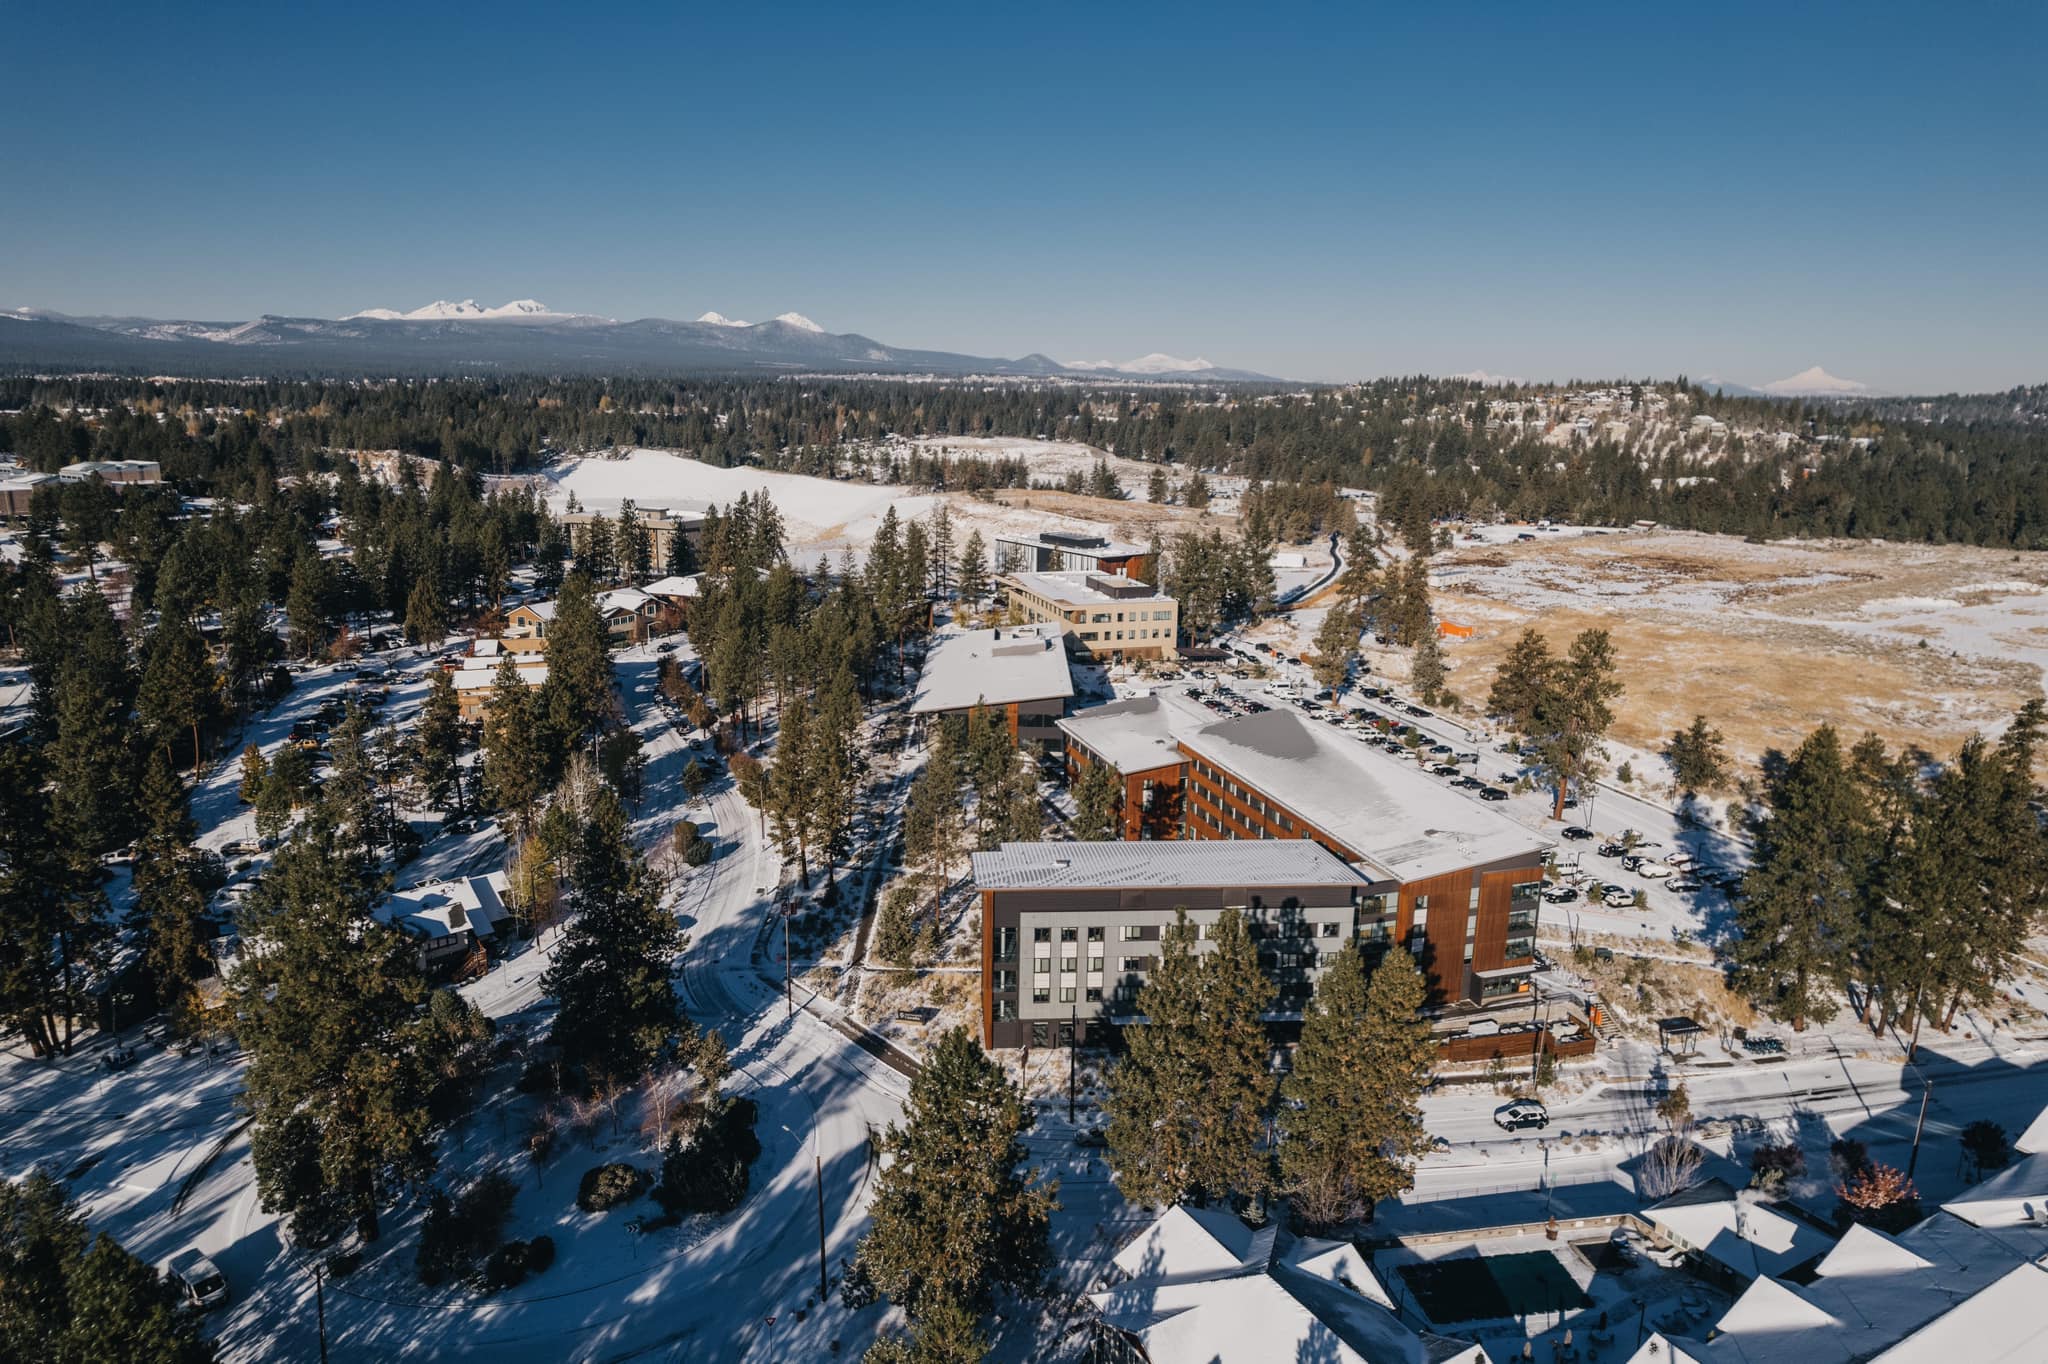 little colleges for skiing and riding